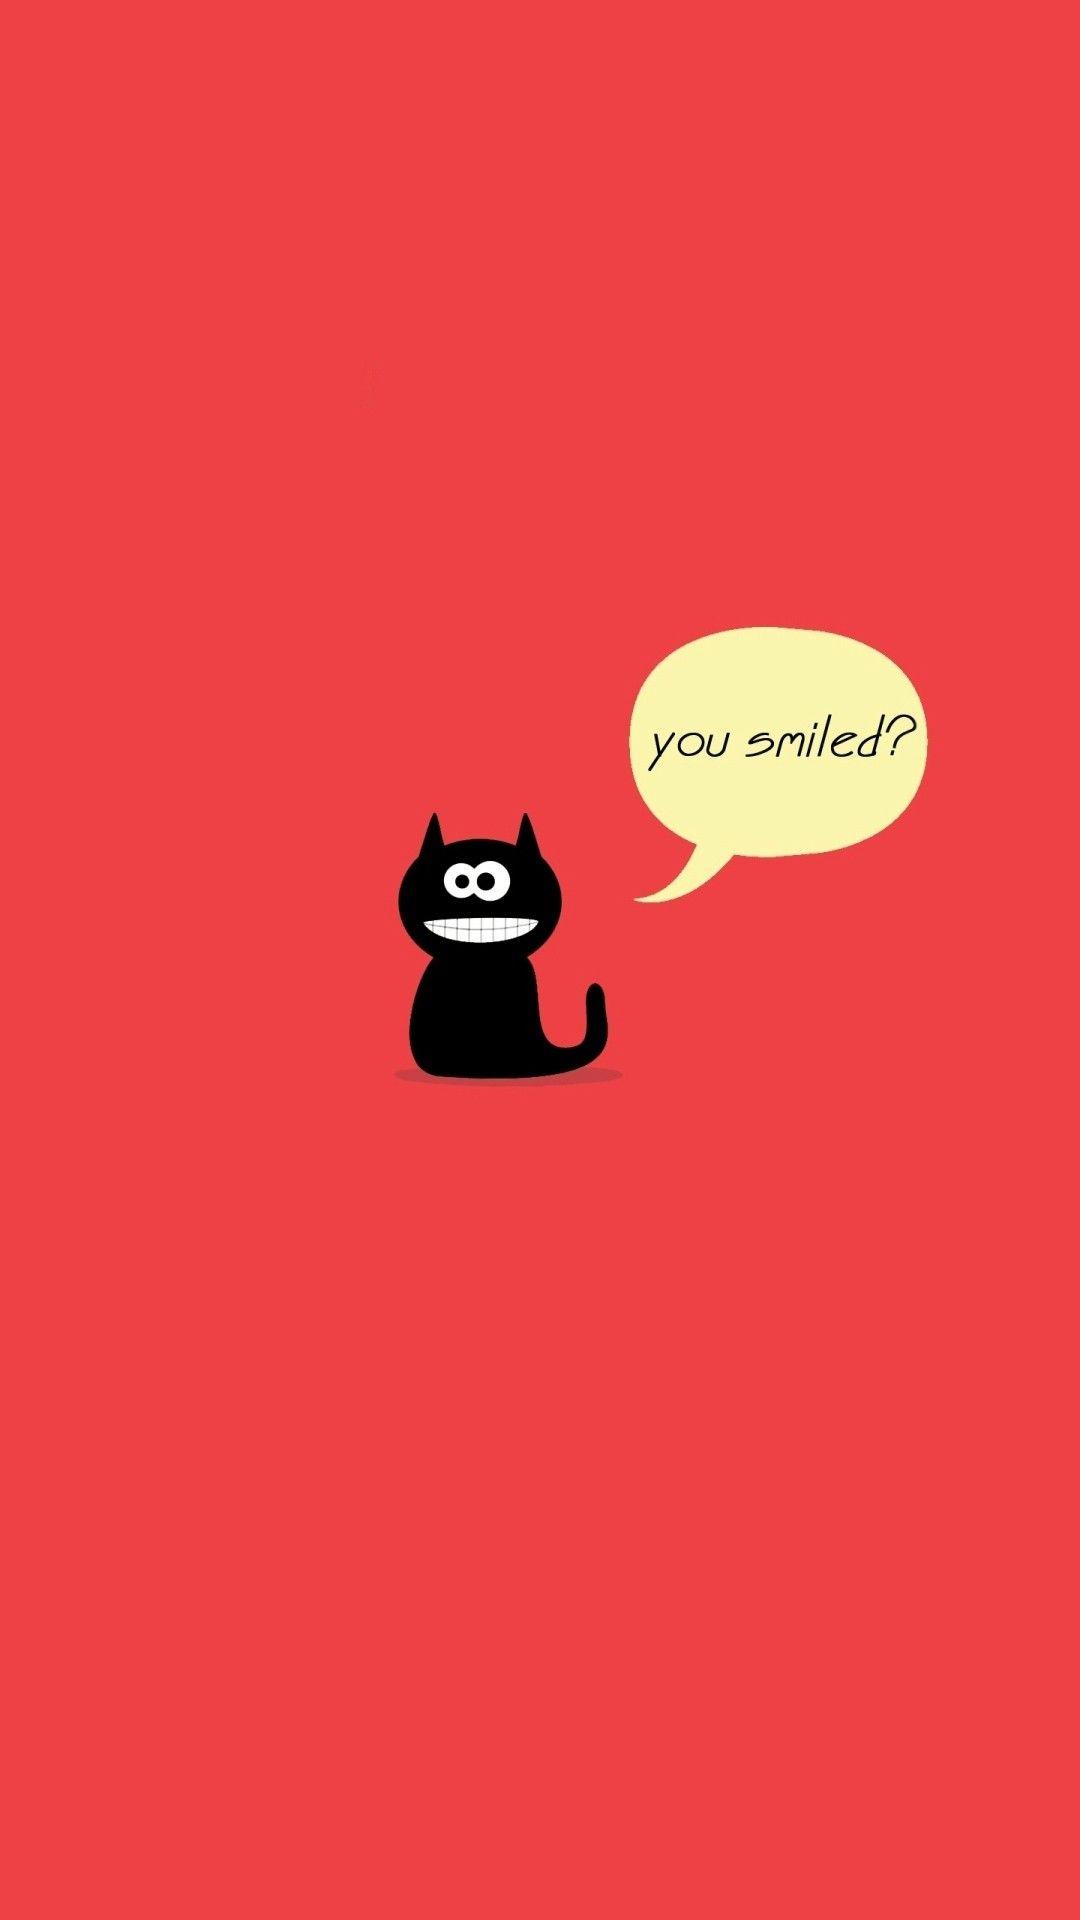 Black Cute Smile Cat. Tap to see more funny cartoon iPhone